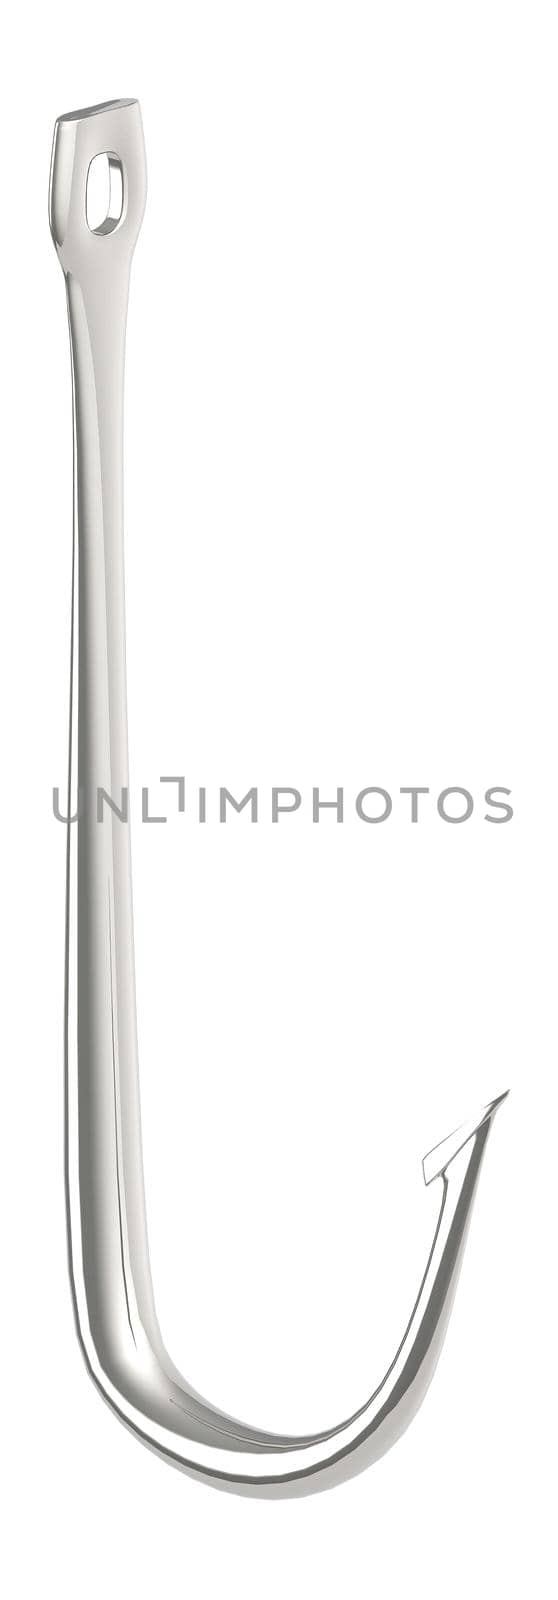 3d hook in white isolated background by qualityrender